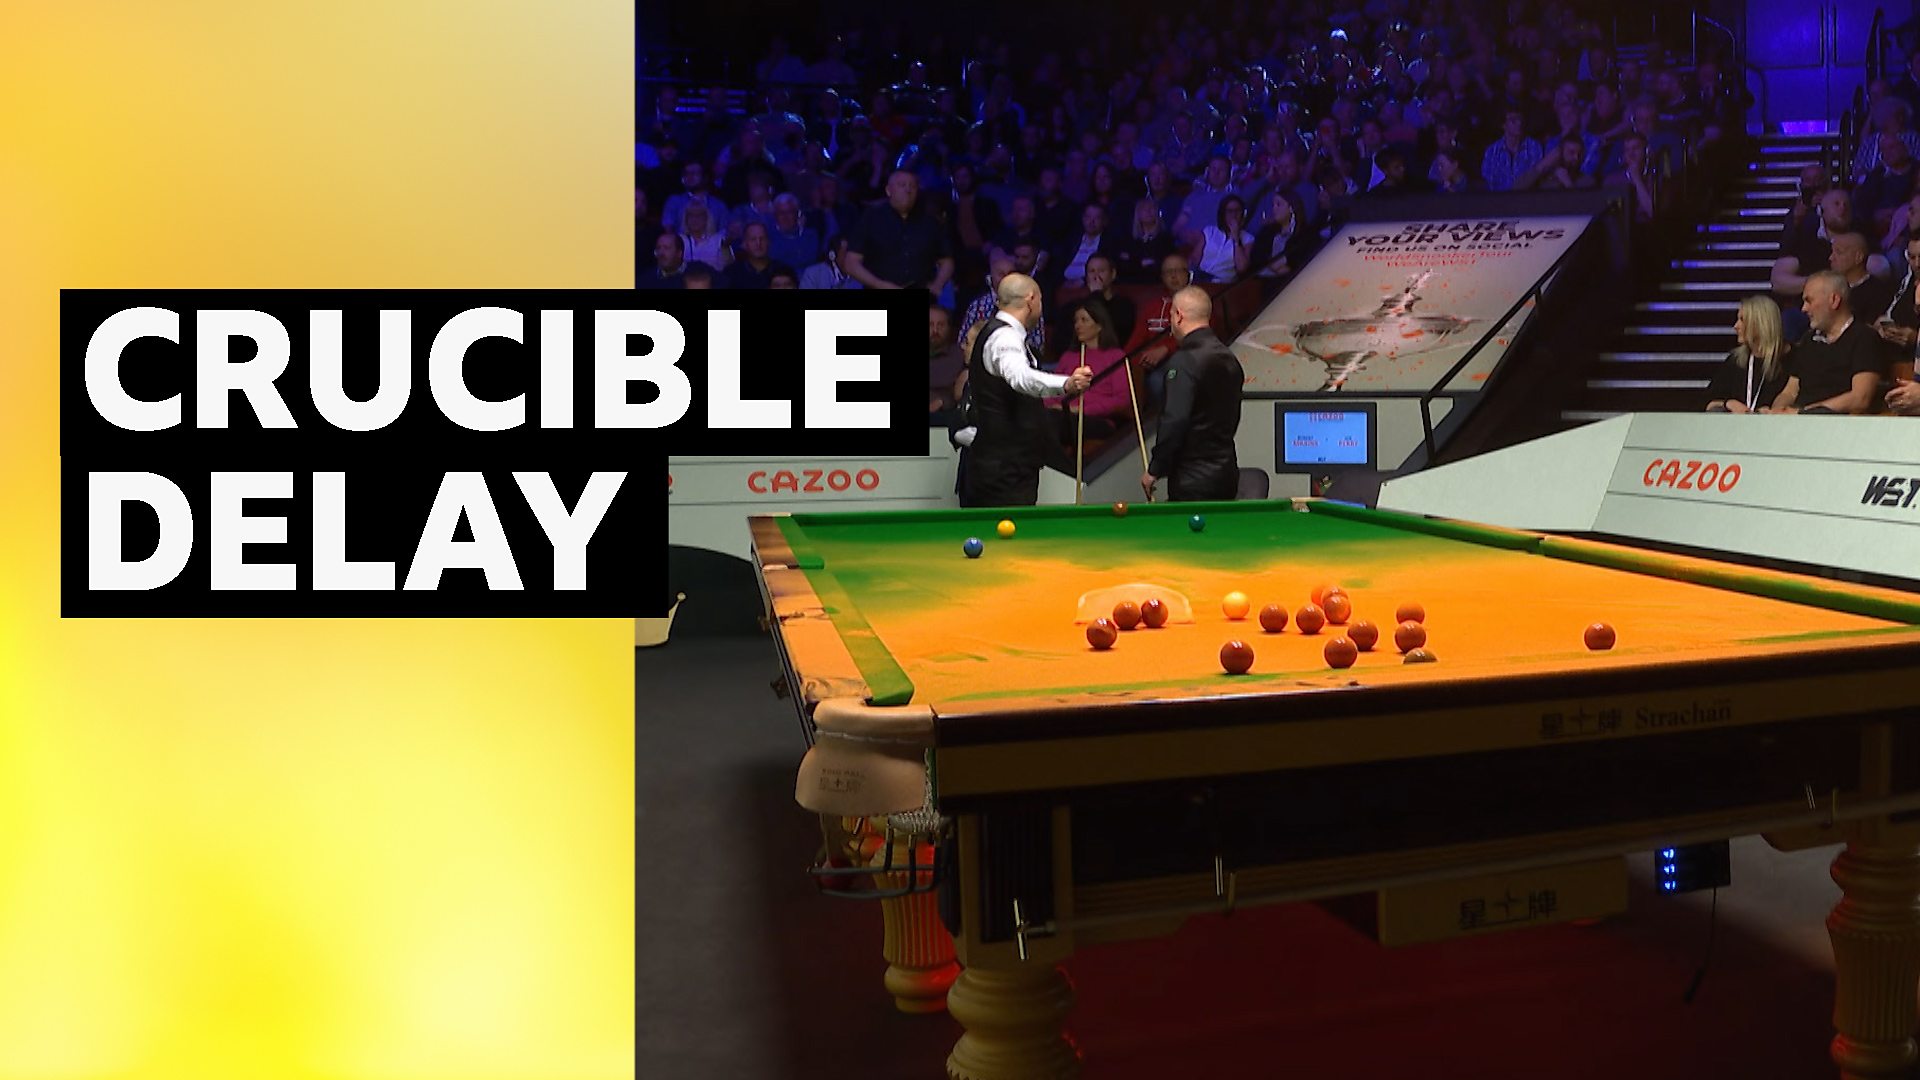 World Snooker Championship 2023 Play halted as protesters delay Crucible matches